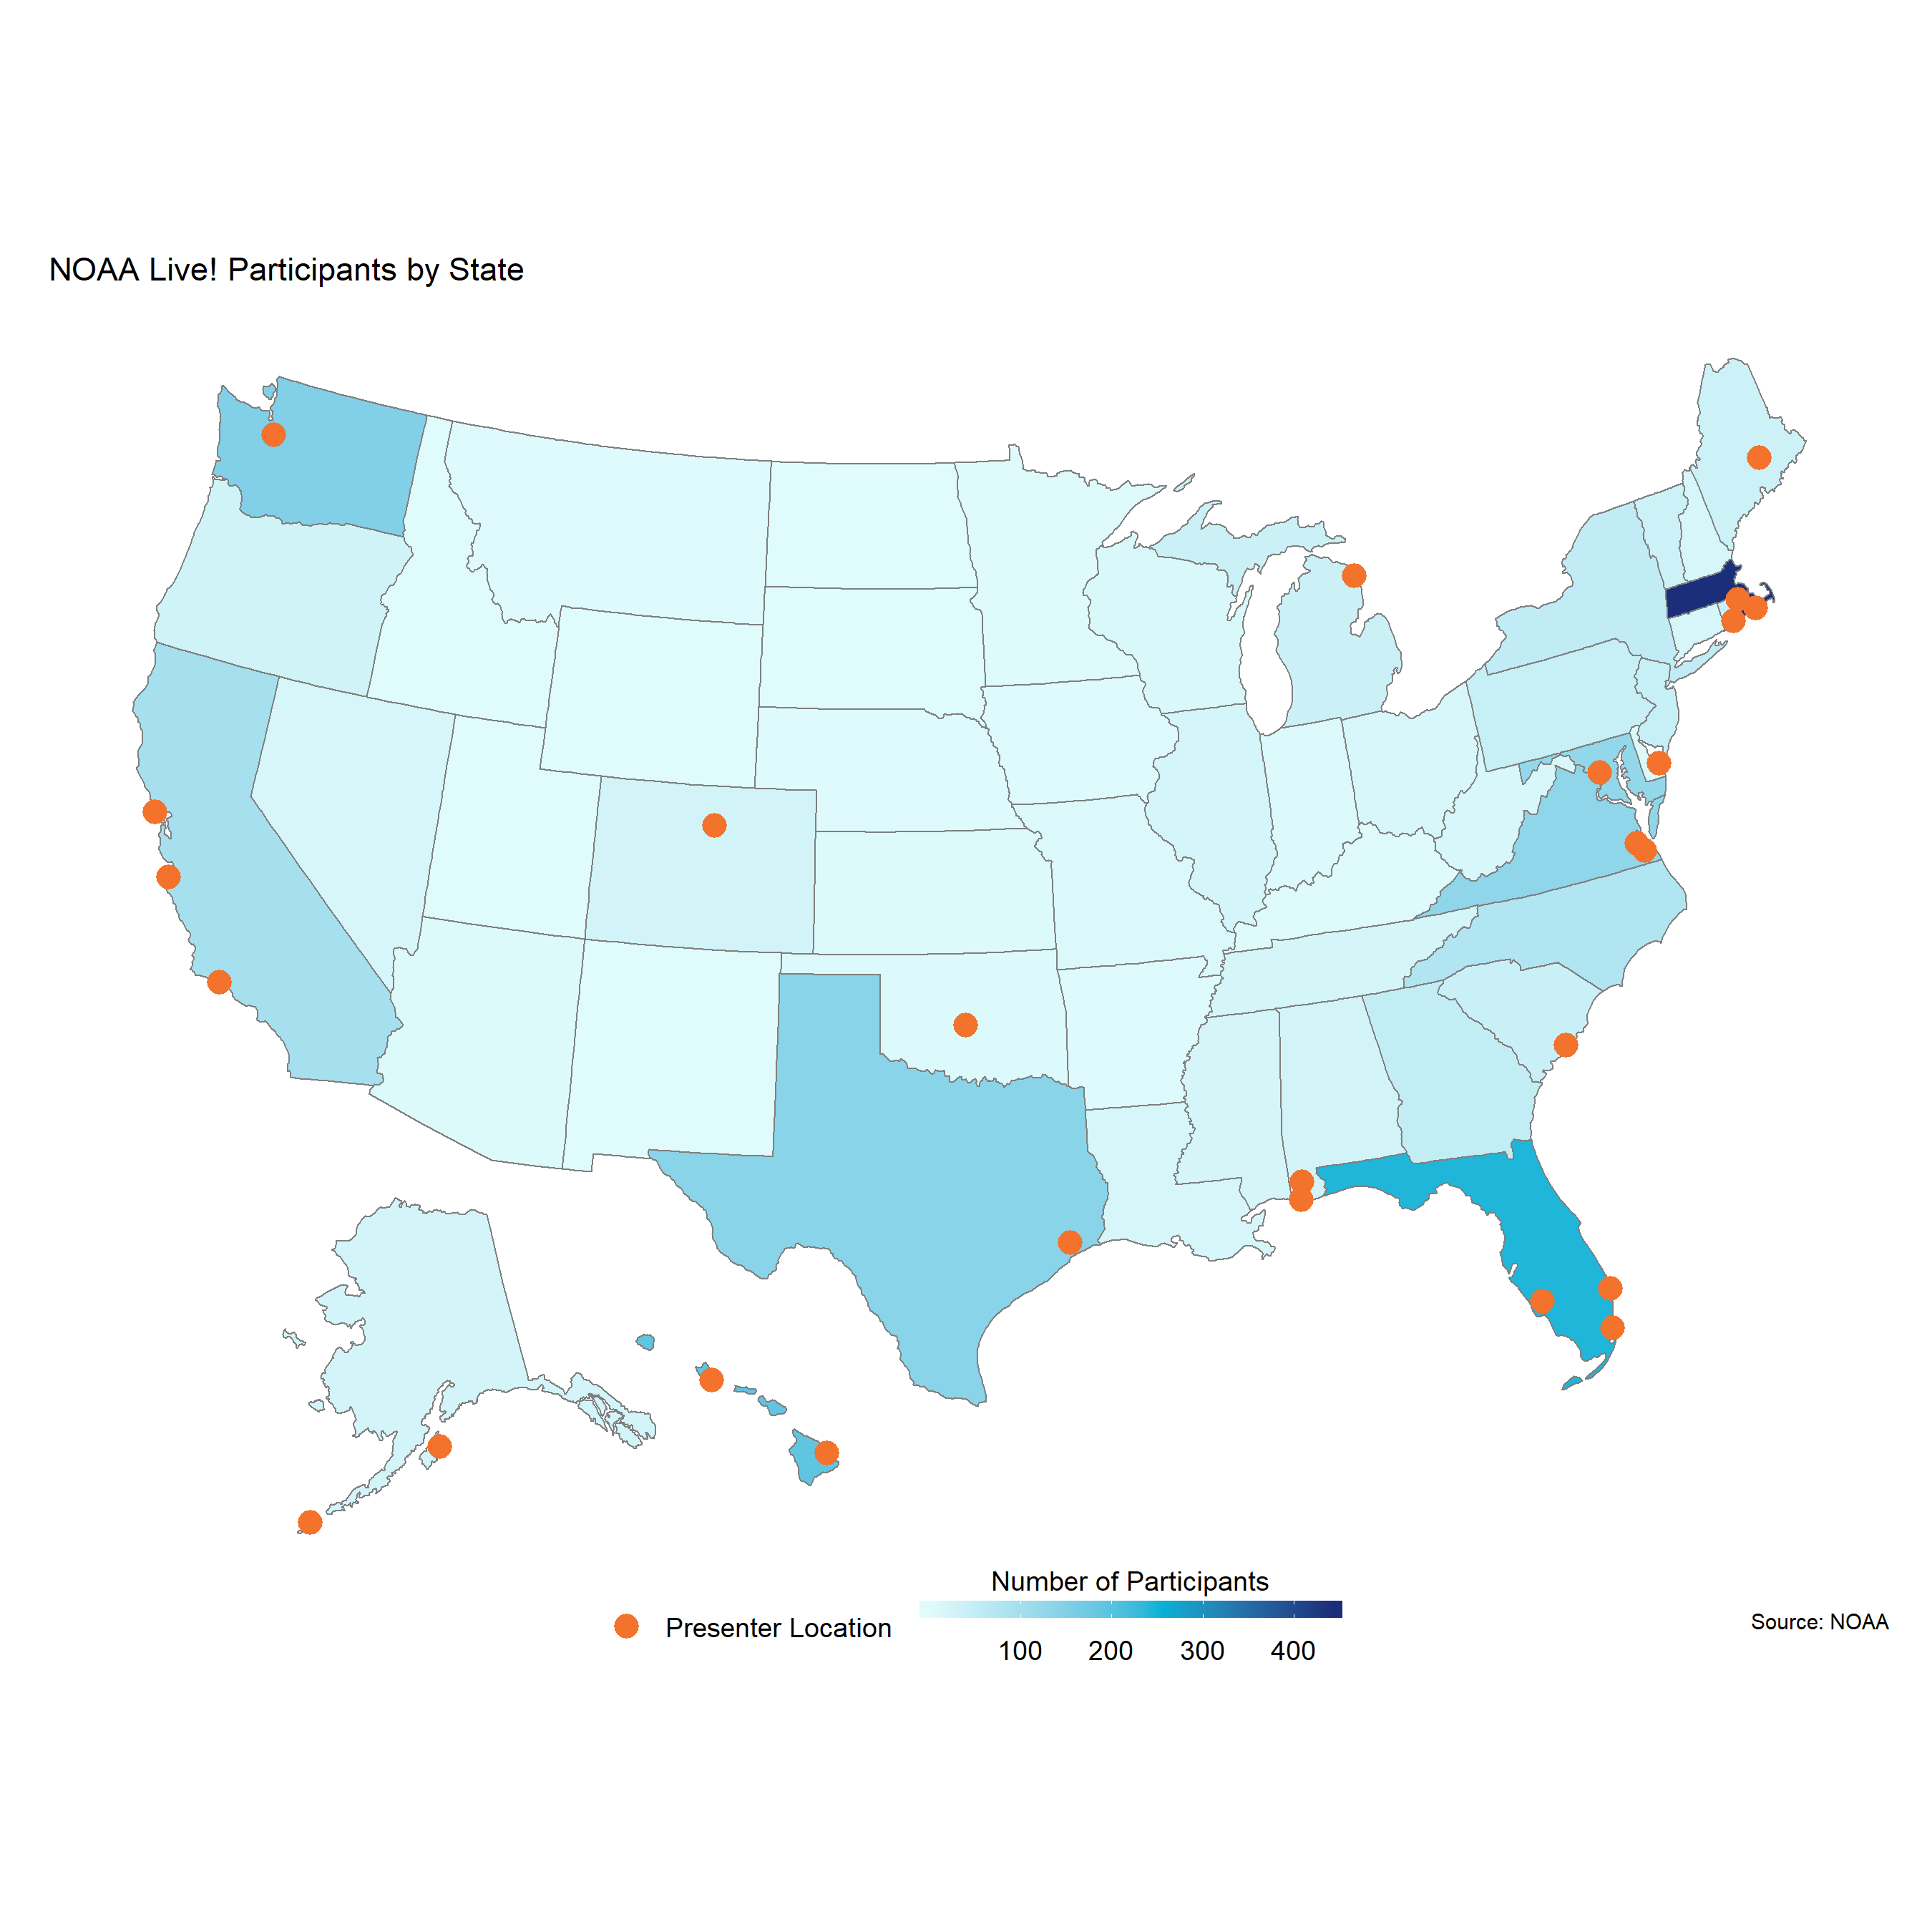 A map of the United States shows webinar participation from around the country. Orange dots show where the webinar presenters were located, and the different shades of blue show the number of participants from each state throughout the webinar series for which location information was collected. (NOAA)